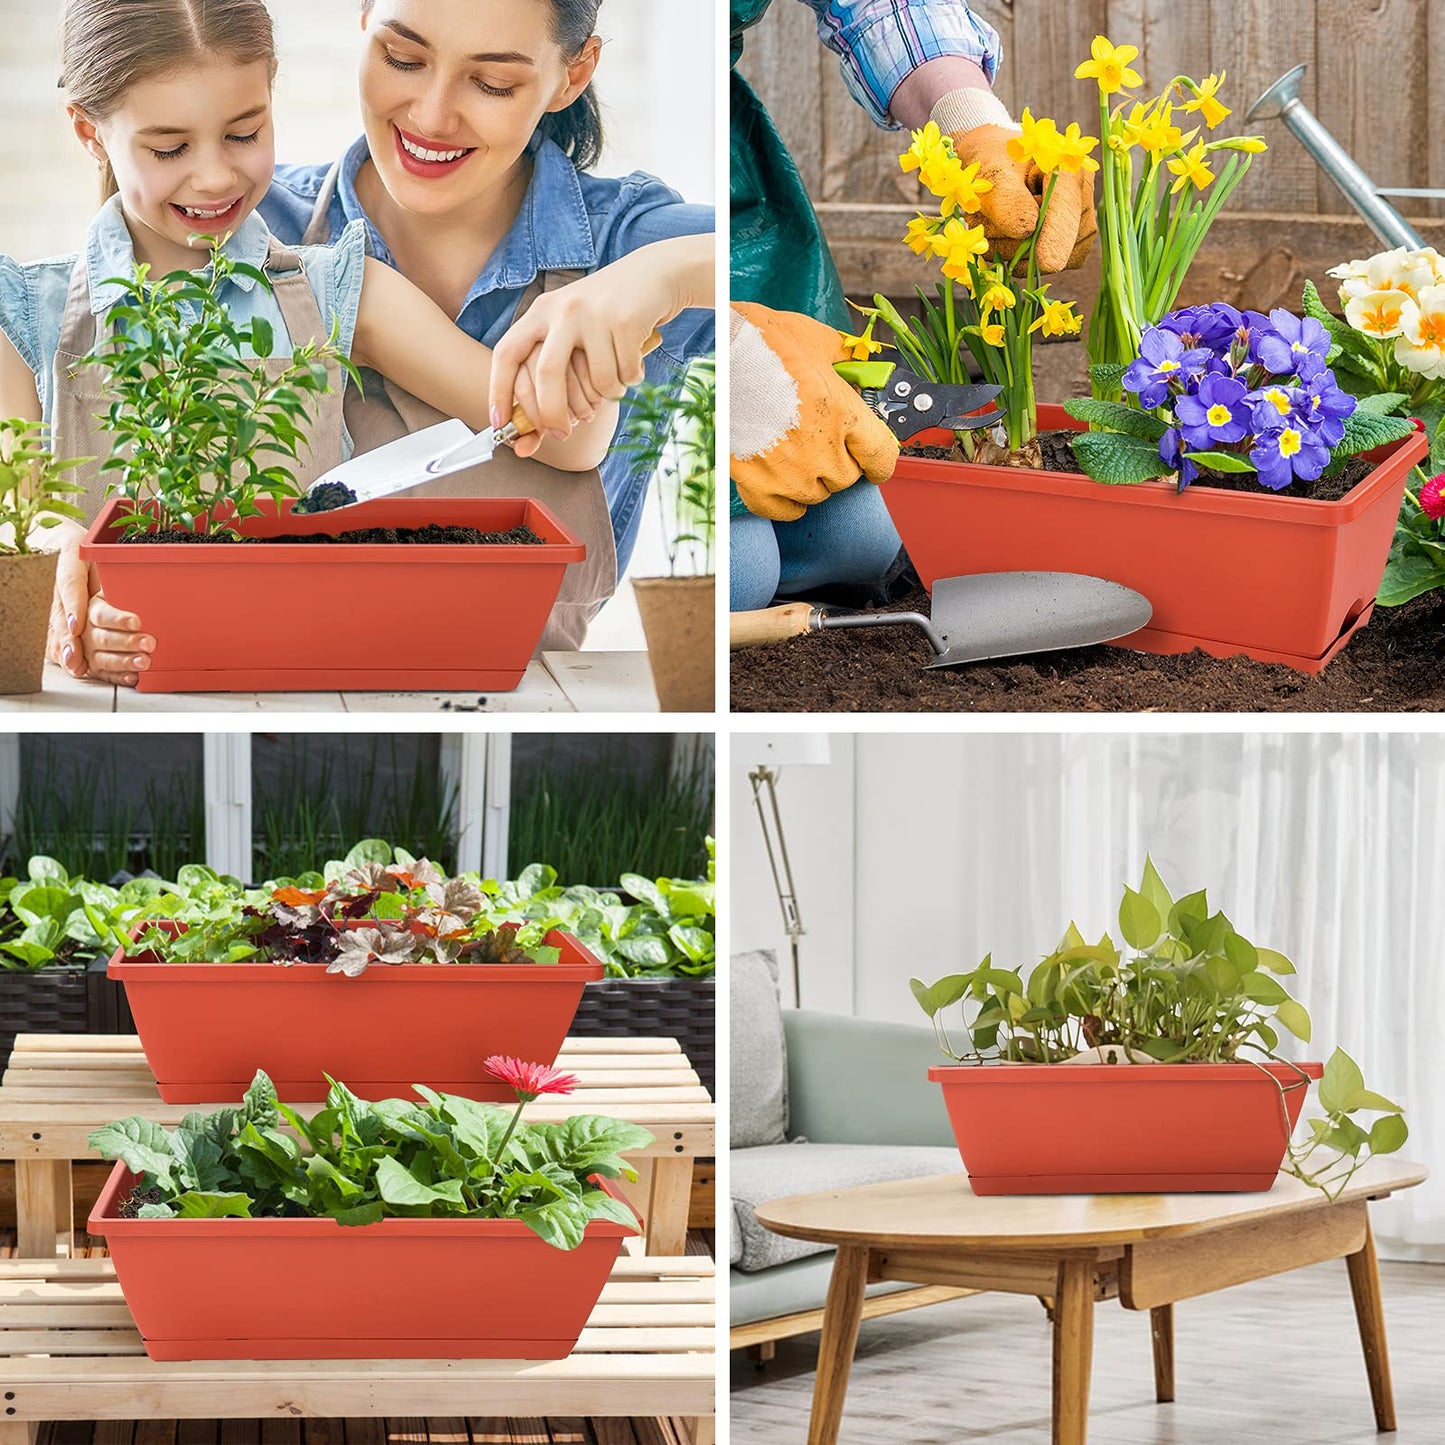 CHUKEMAOYI Window Box Planter, 7 Pack Plastic Vegetable Flower Planters Boxes 17 Inches Rectangular Flower Pots with Saucers for Indoor Outdoor Garden, Patio, Home Decor